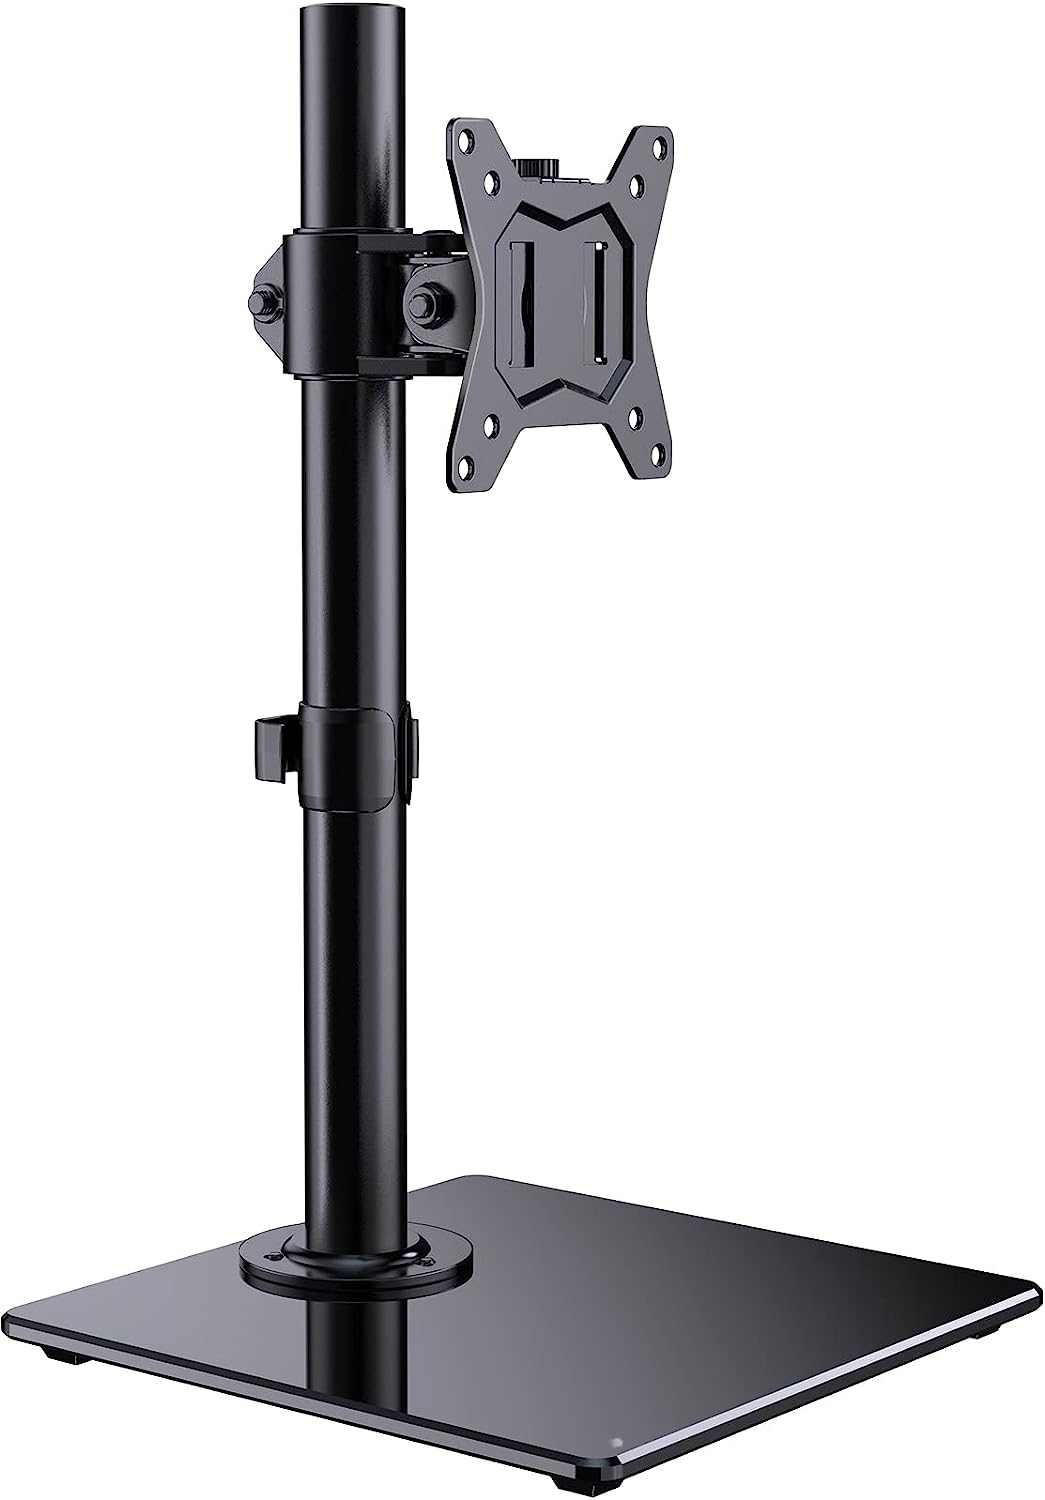 Monitor Stand For 13” 32” Screens, Er Gear Single Freestanding Monitor Arm With Tempered Glass Base, Vesa Monitor Desk Mount With Height Adjustable Swivel, Tilt, Rotation, Vesa 75x75 100x100 